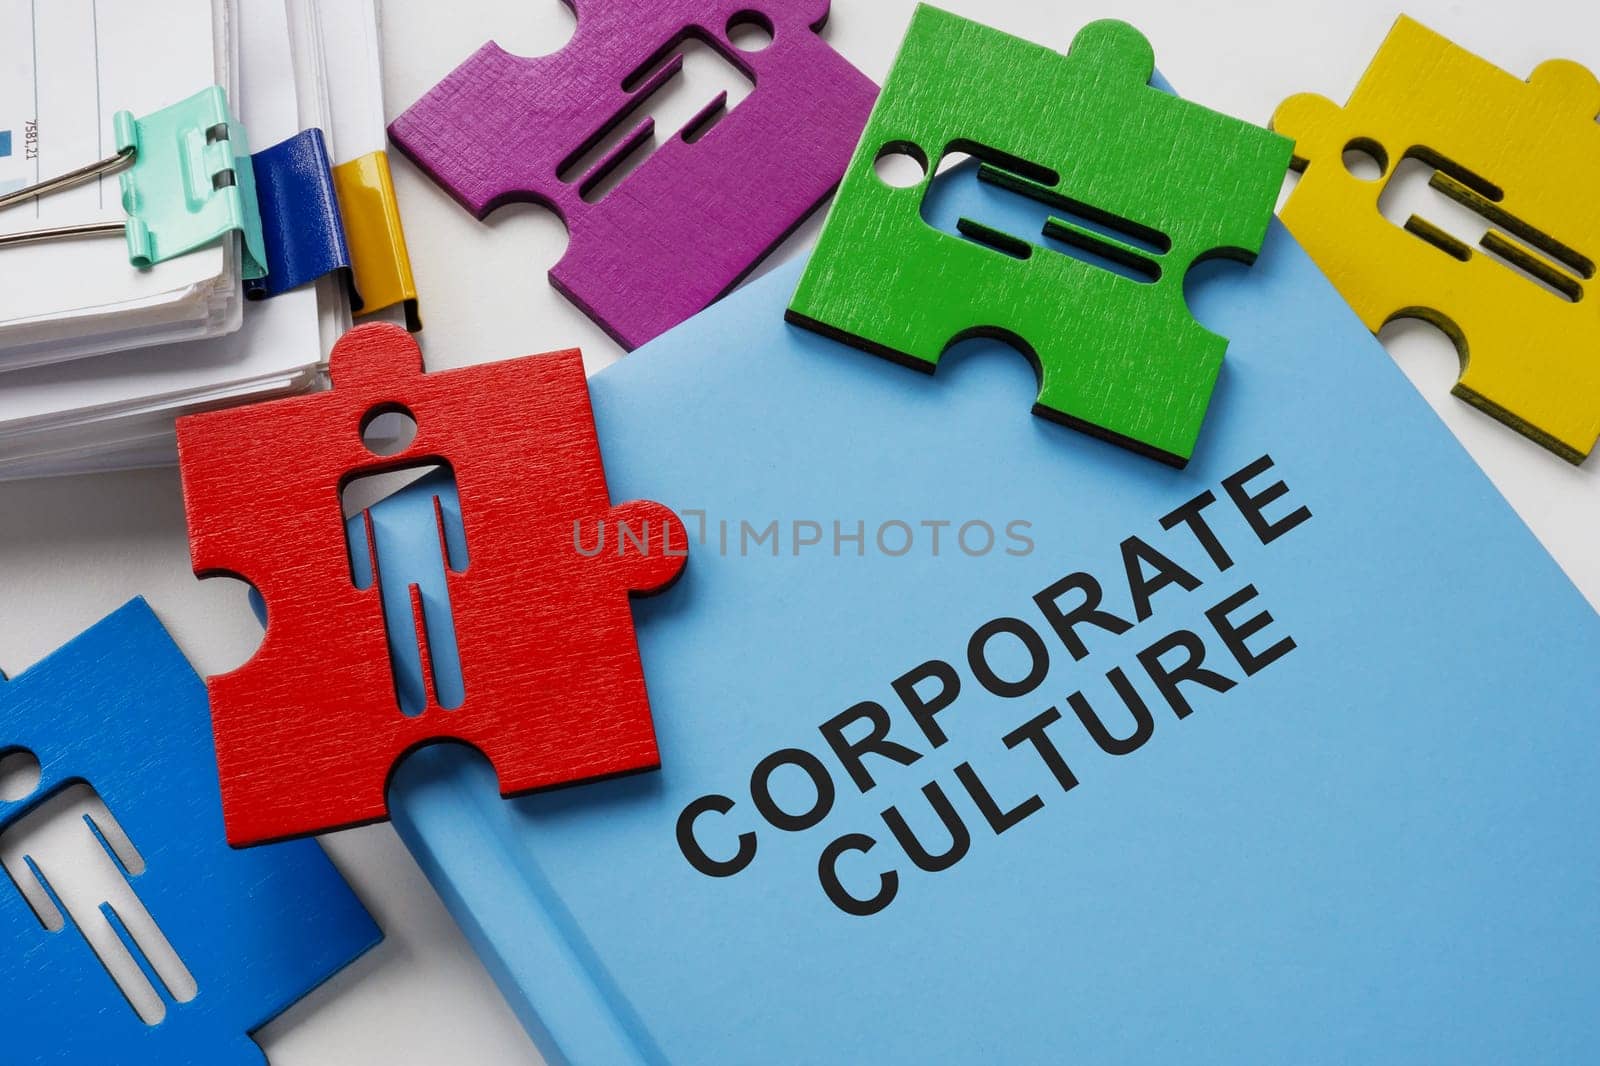 Book about corporate culture and puzzle pieces.